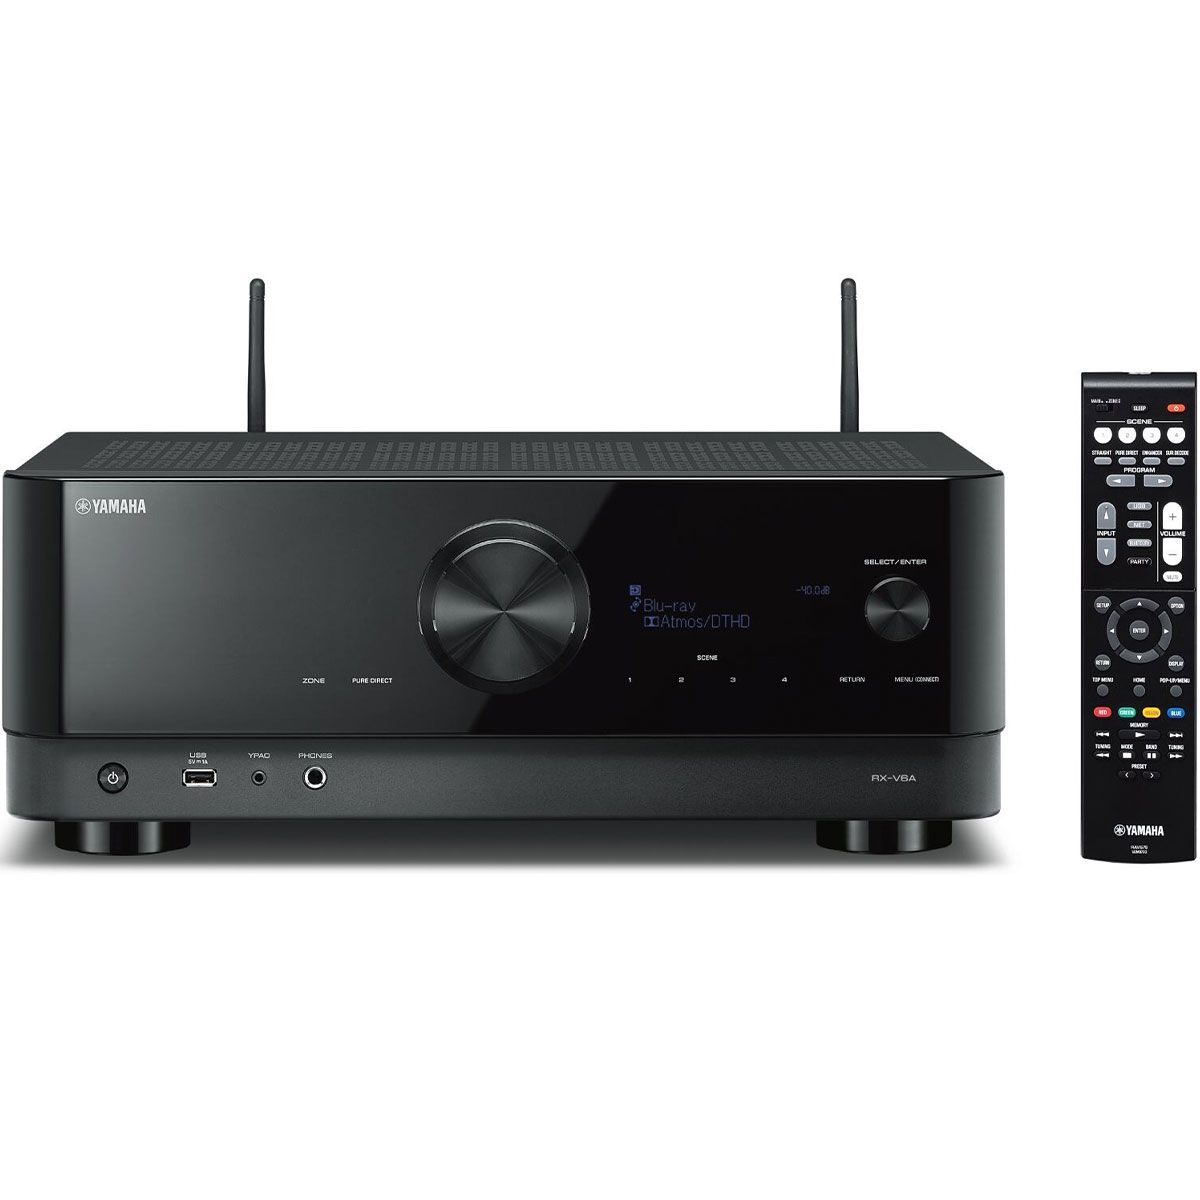 Yamaha RX-V6A 7.2-Channel AV Receiver - front view with remote and wifi antennas